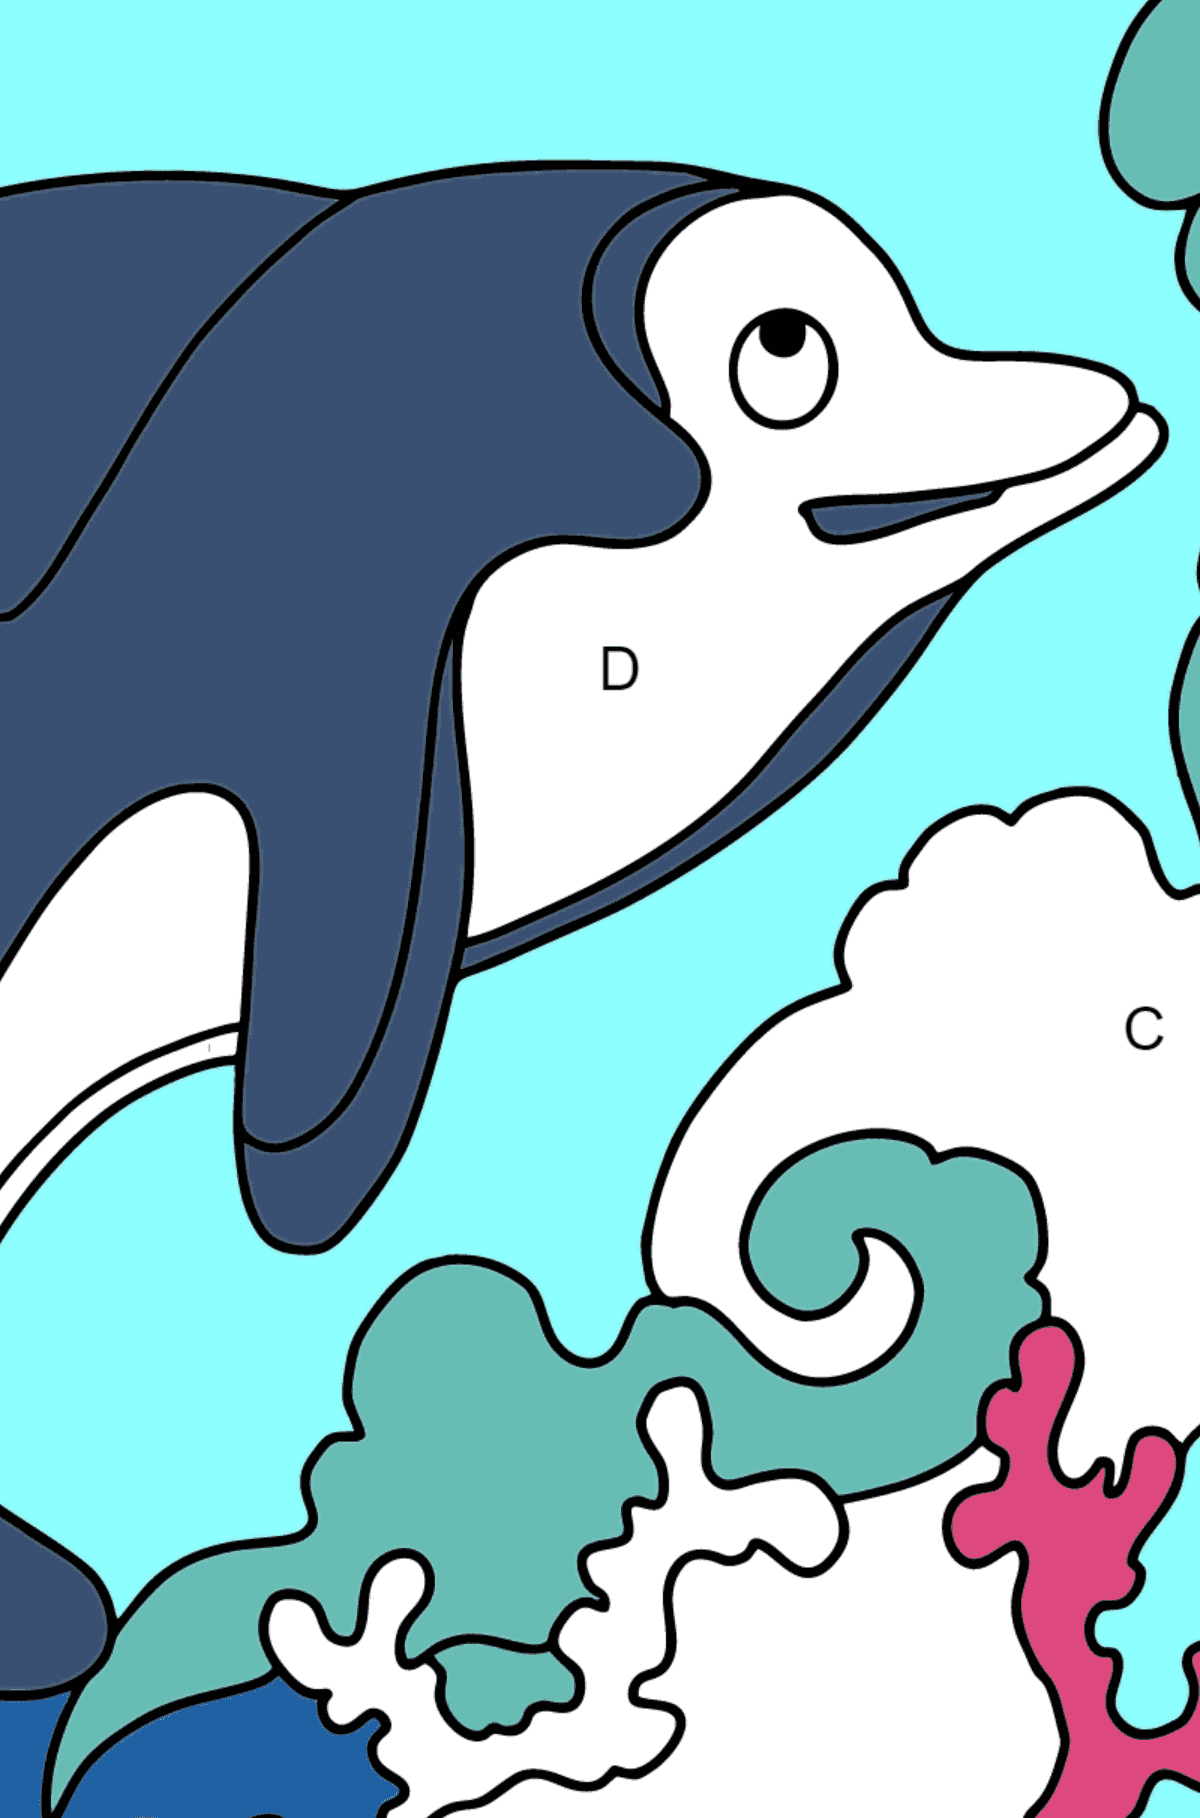 Coloring Page - A Dolphin, a Smart and Friendly Animal - Coloring by Letters for Kids